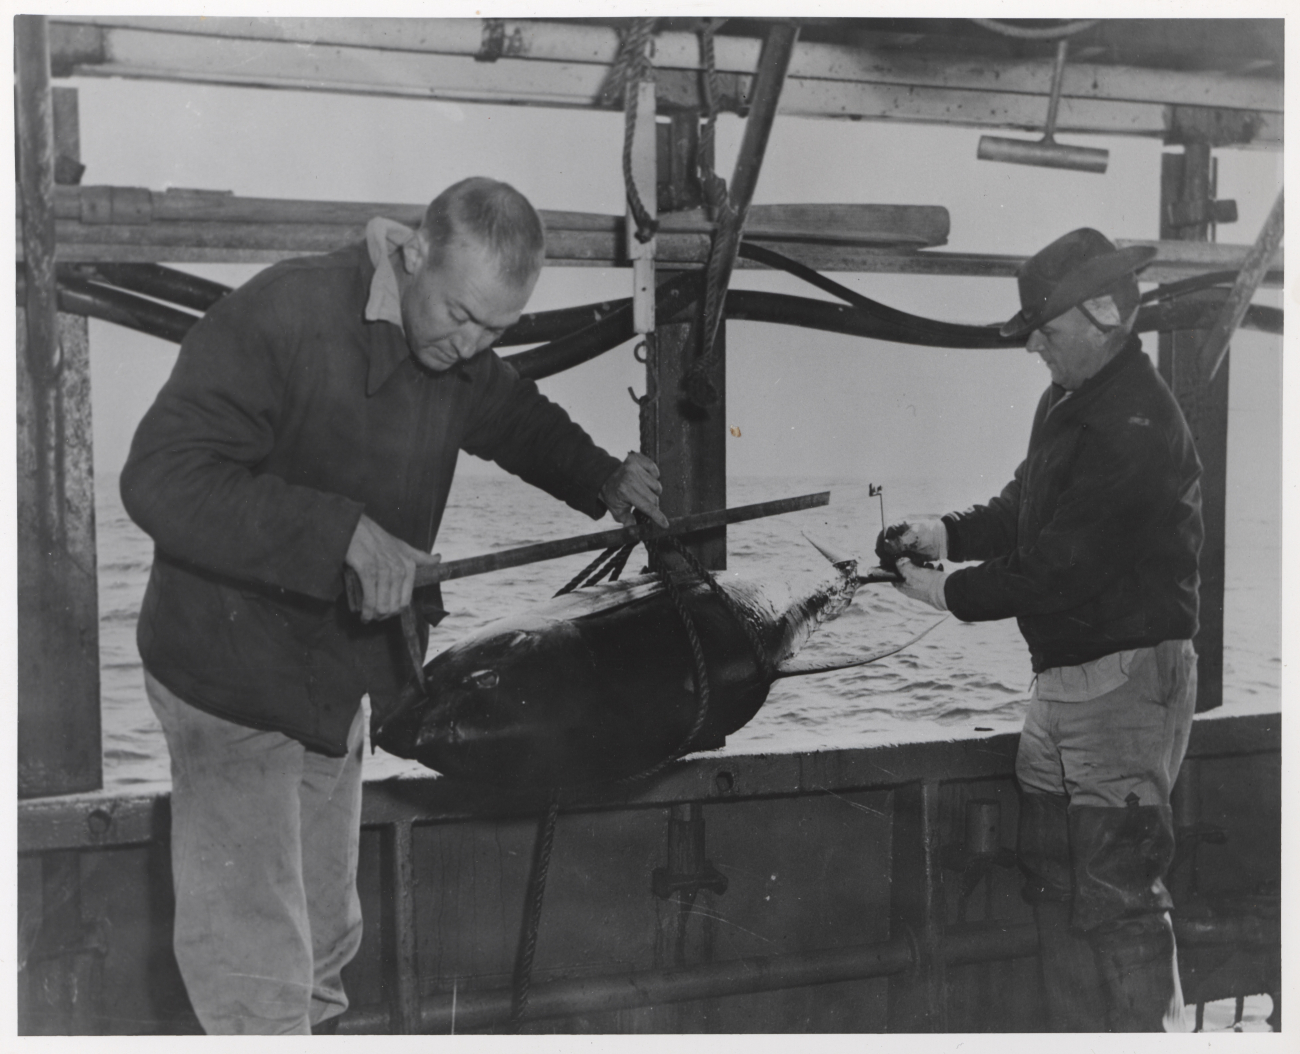 Harvey Bullis (foreground) and George Berglund taking weight and lengthmeasurements of yellowfin tuna on board FWS research vessel OREGON